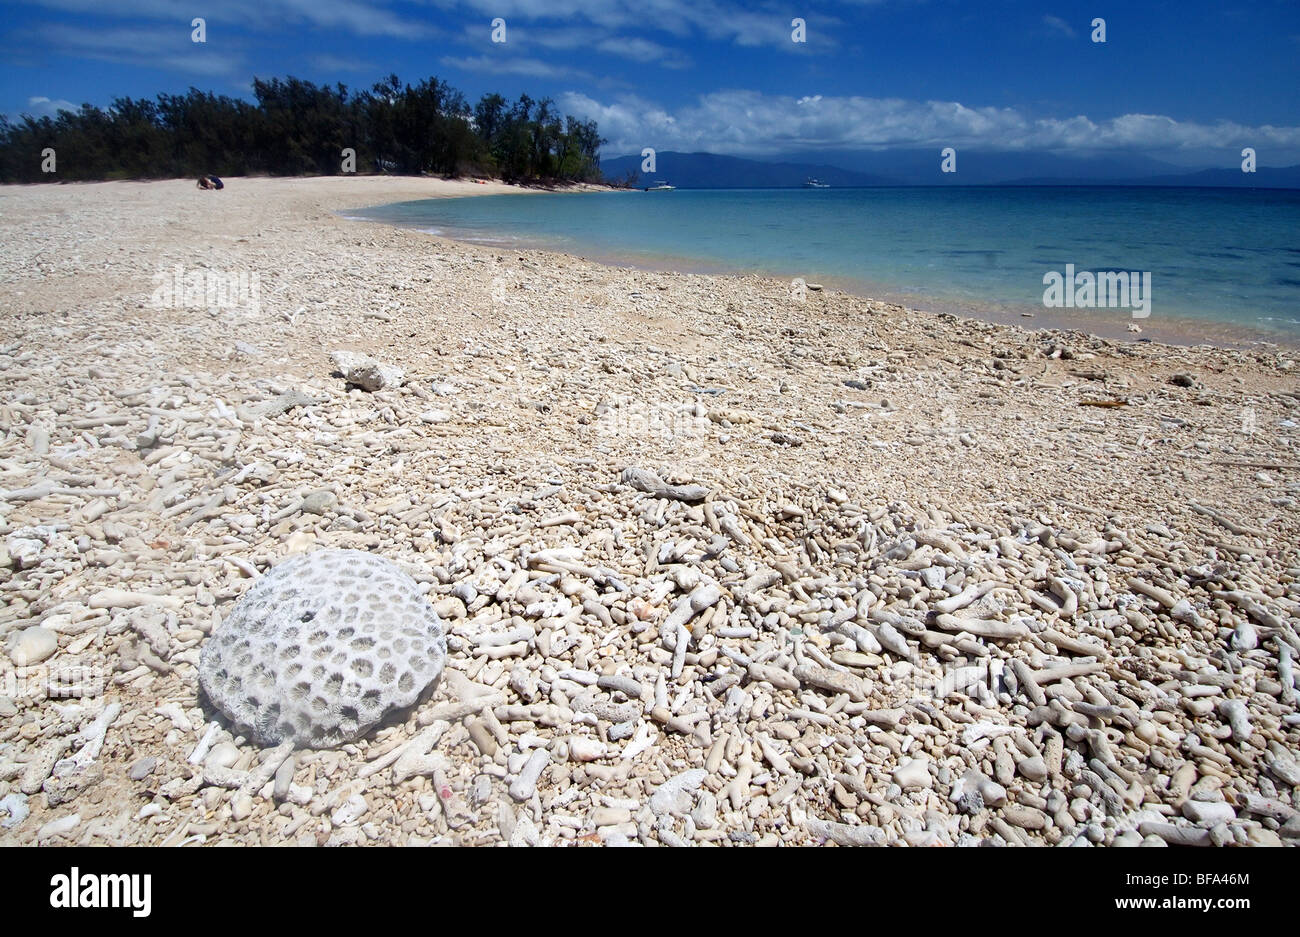 Coral rubble beach on Russell Island, Frankland Islands National Park, Great Barrier Reef Marine Park, Queensland, Australia Stock Photo